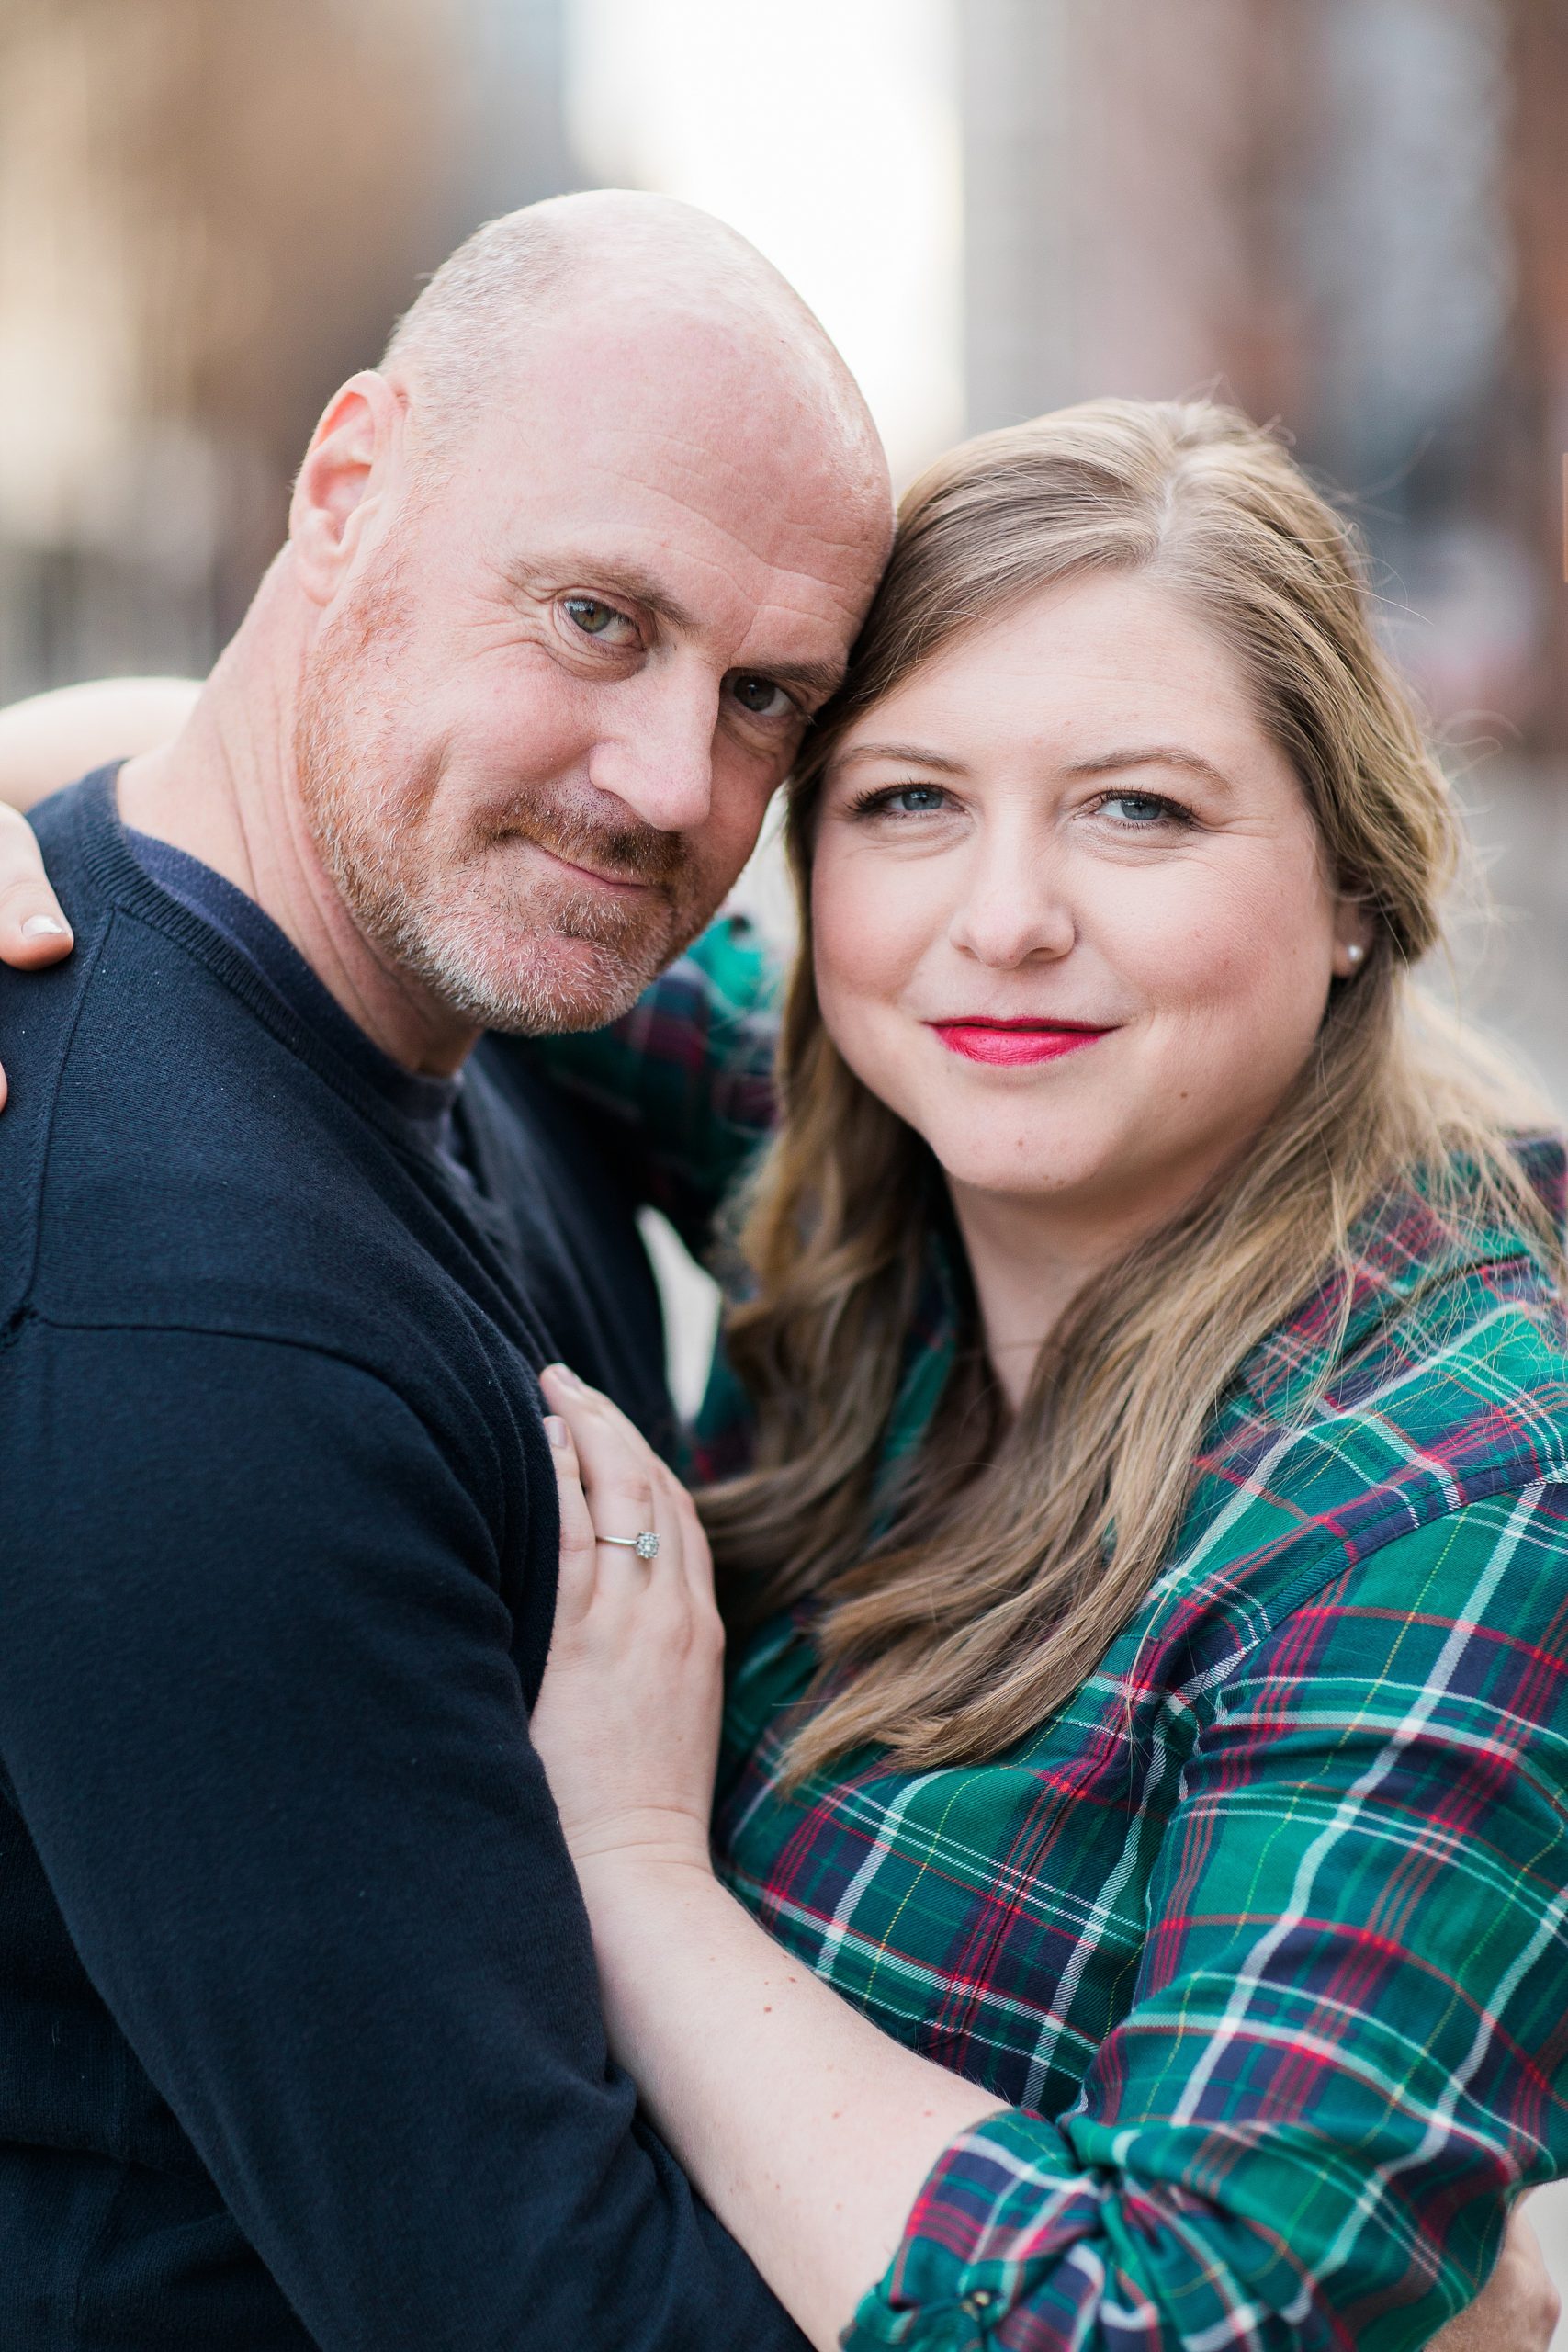 Engagement Photography in Greenville by SARA TOUCHET